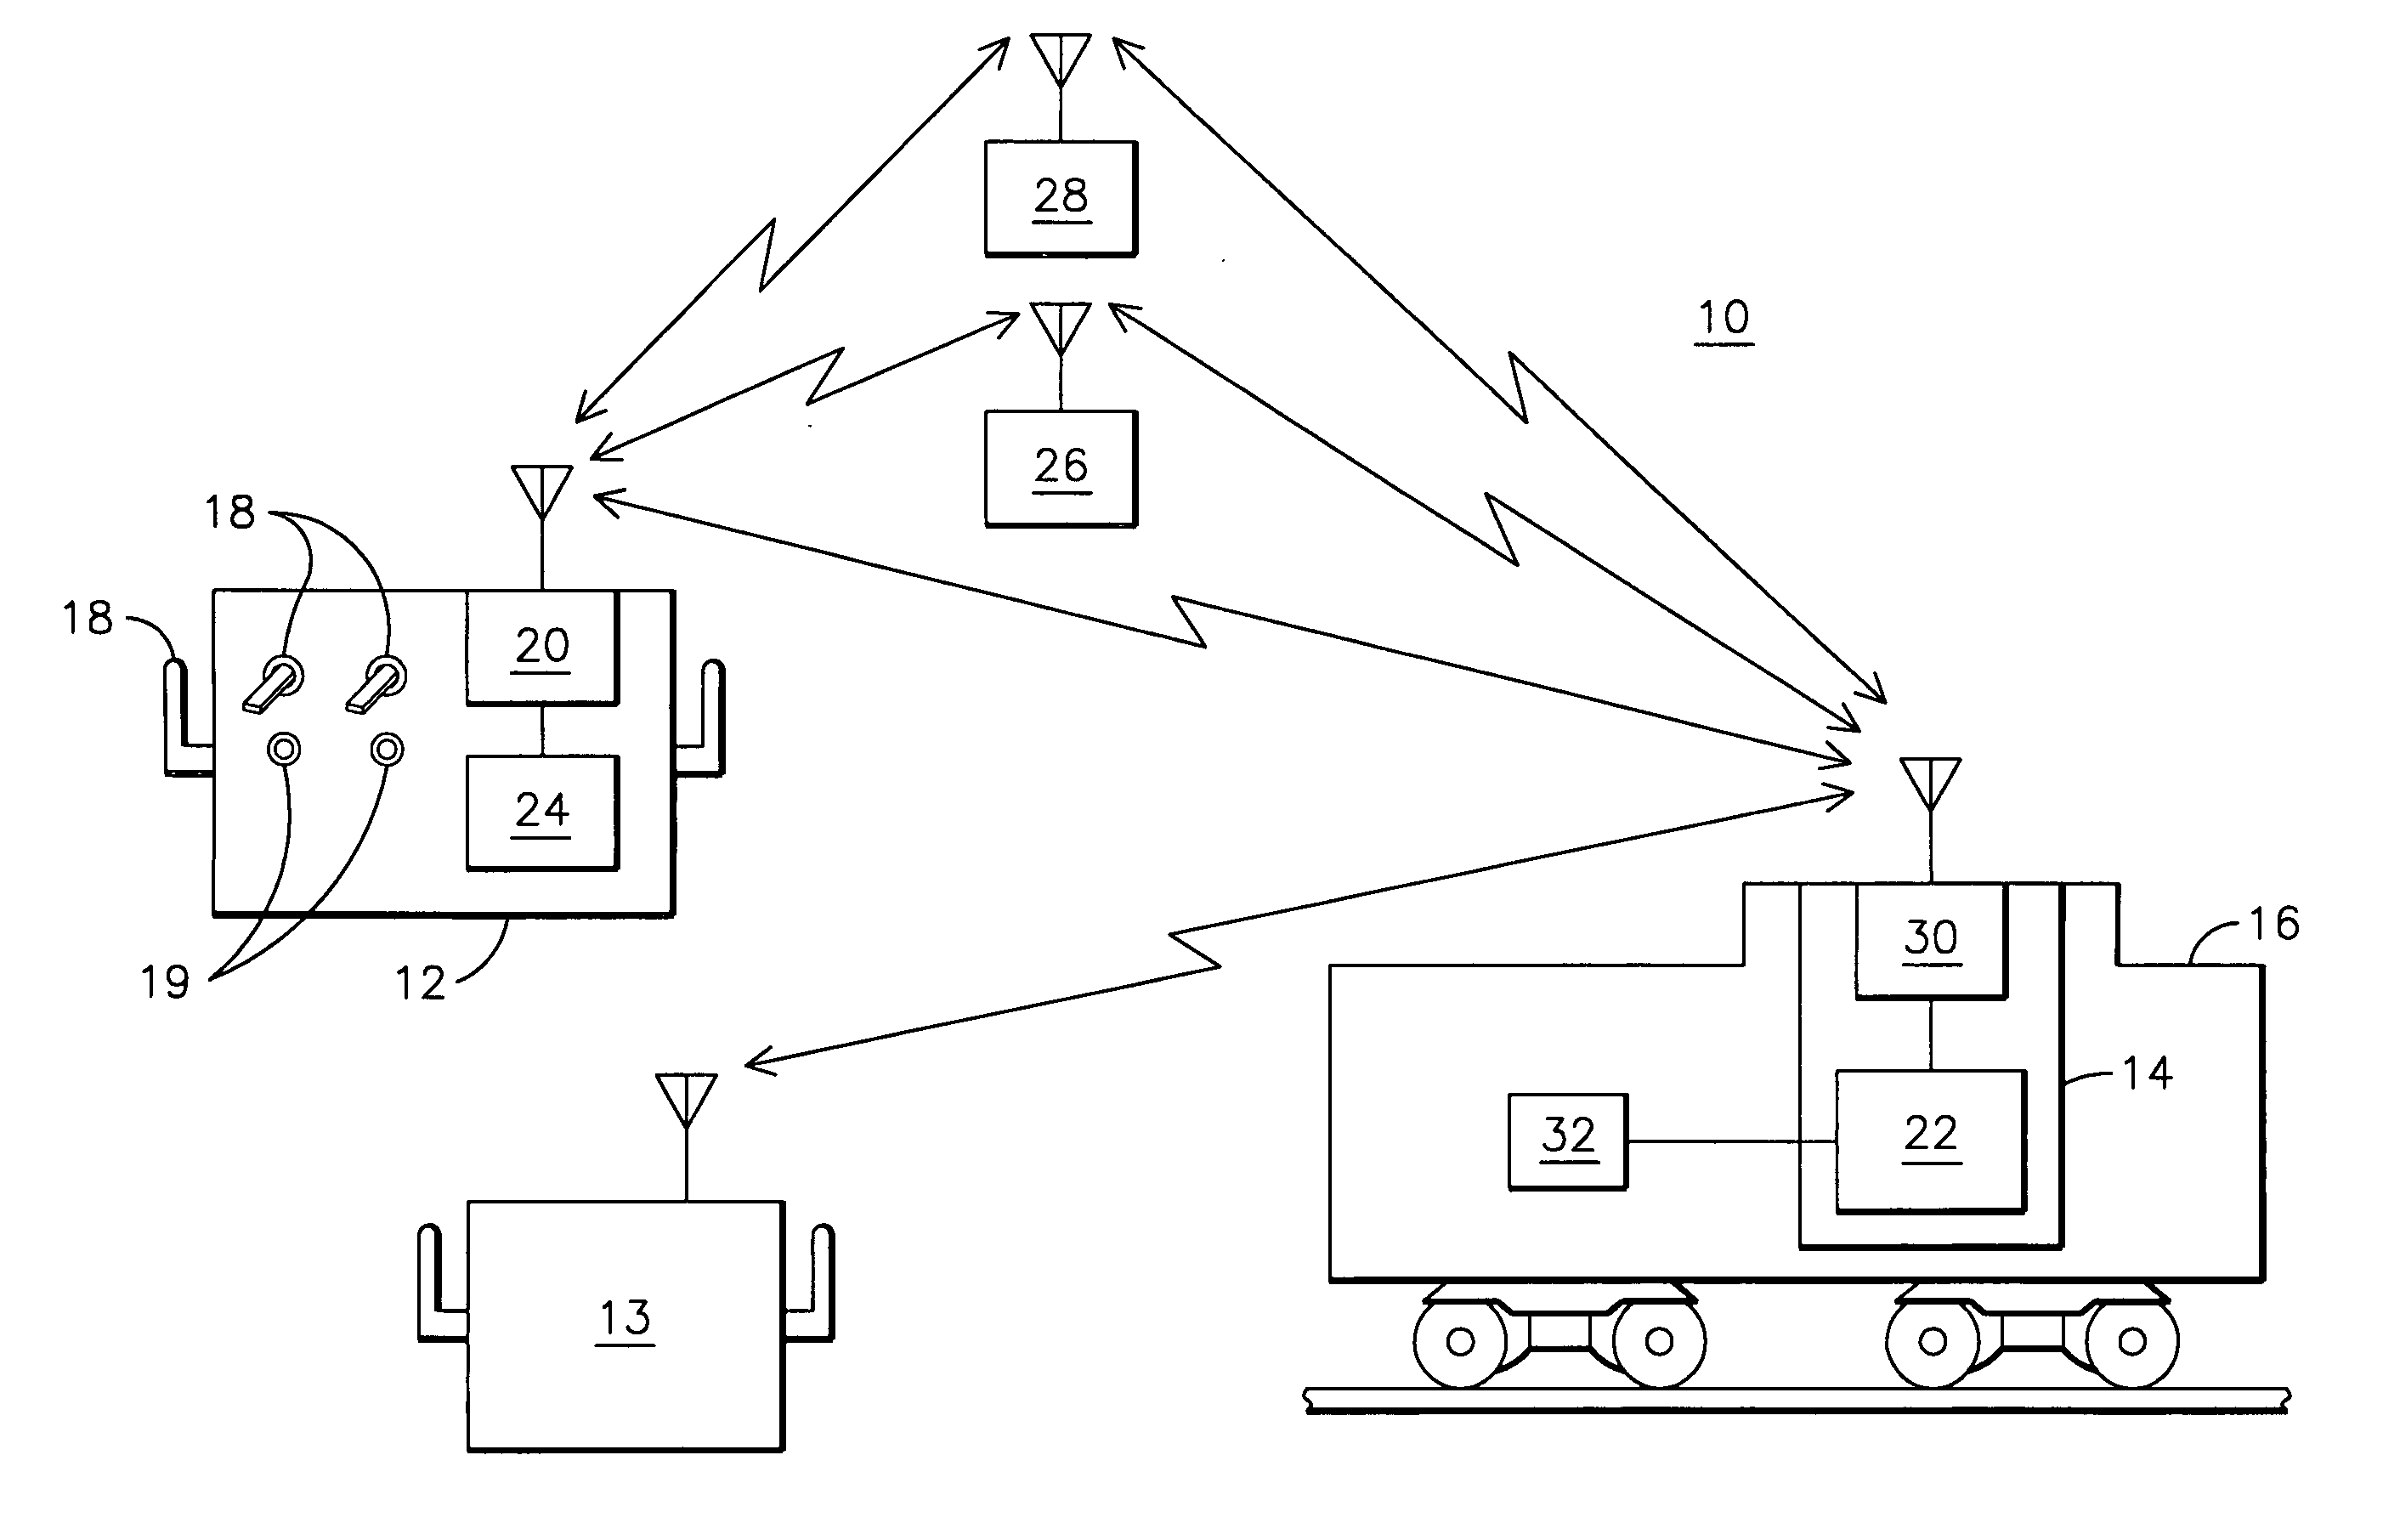 Implicit message sequence numbering for locomotive remote control system wireless communications